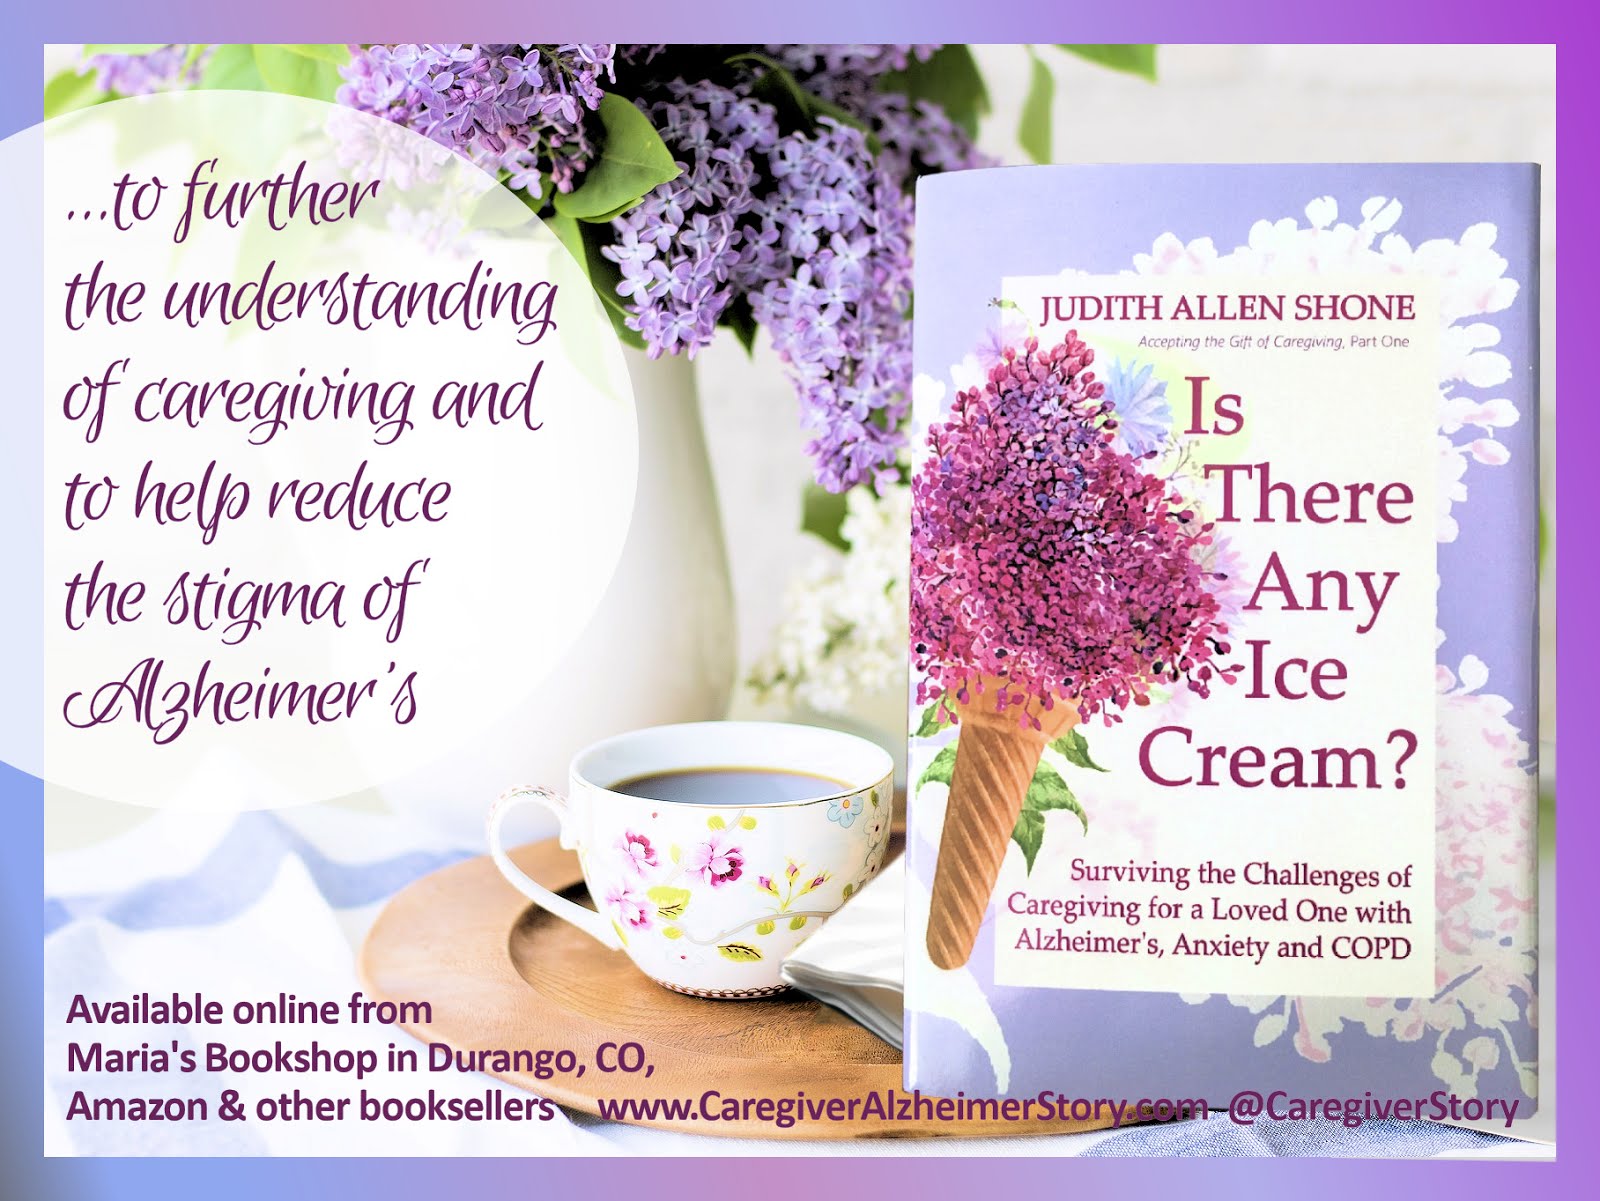 BLOG SPONSORED BY: "Is There Any Ice Cream?" Surviving the Challenges of Caregiving for a Loved One